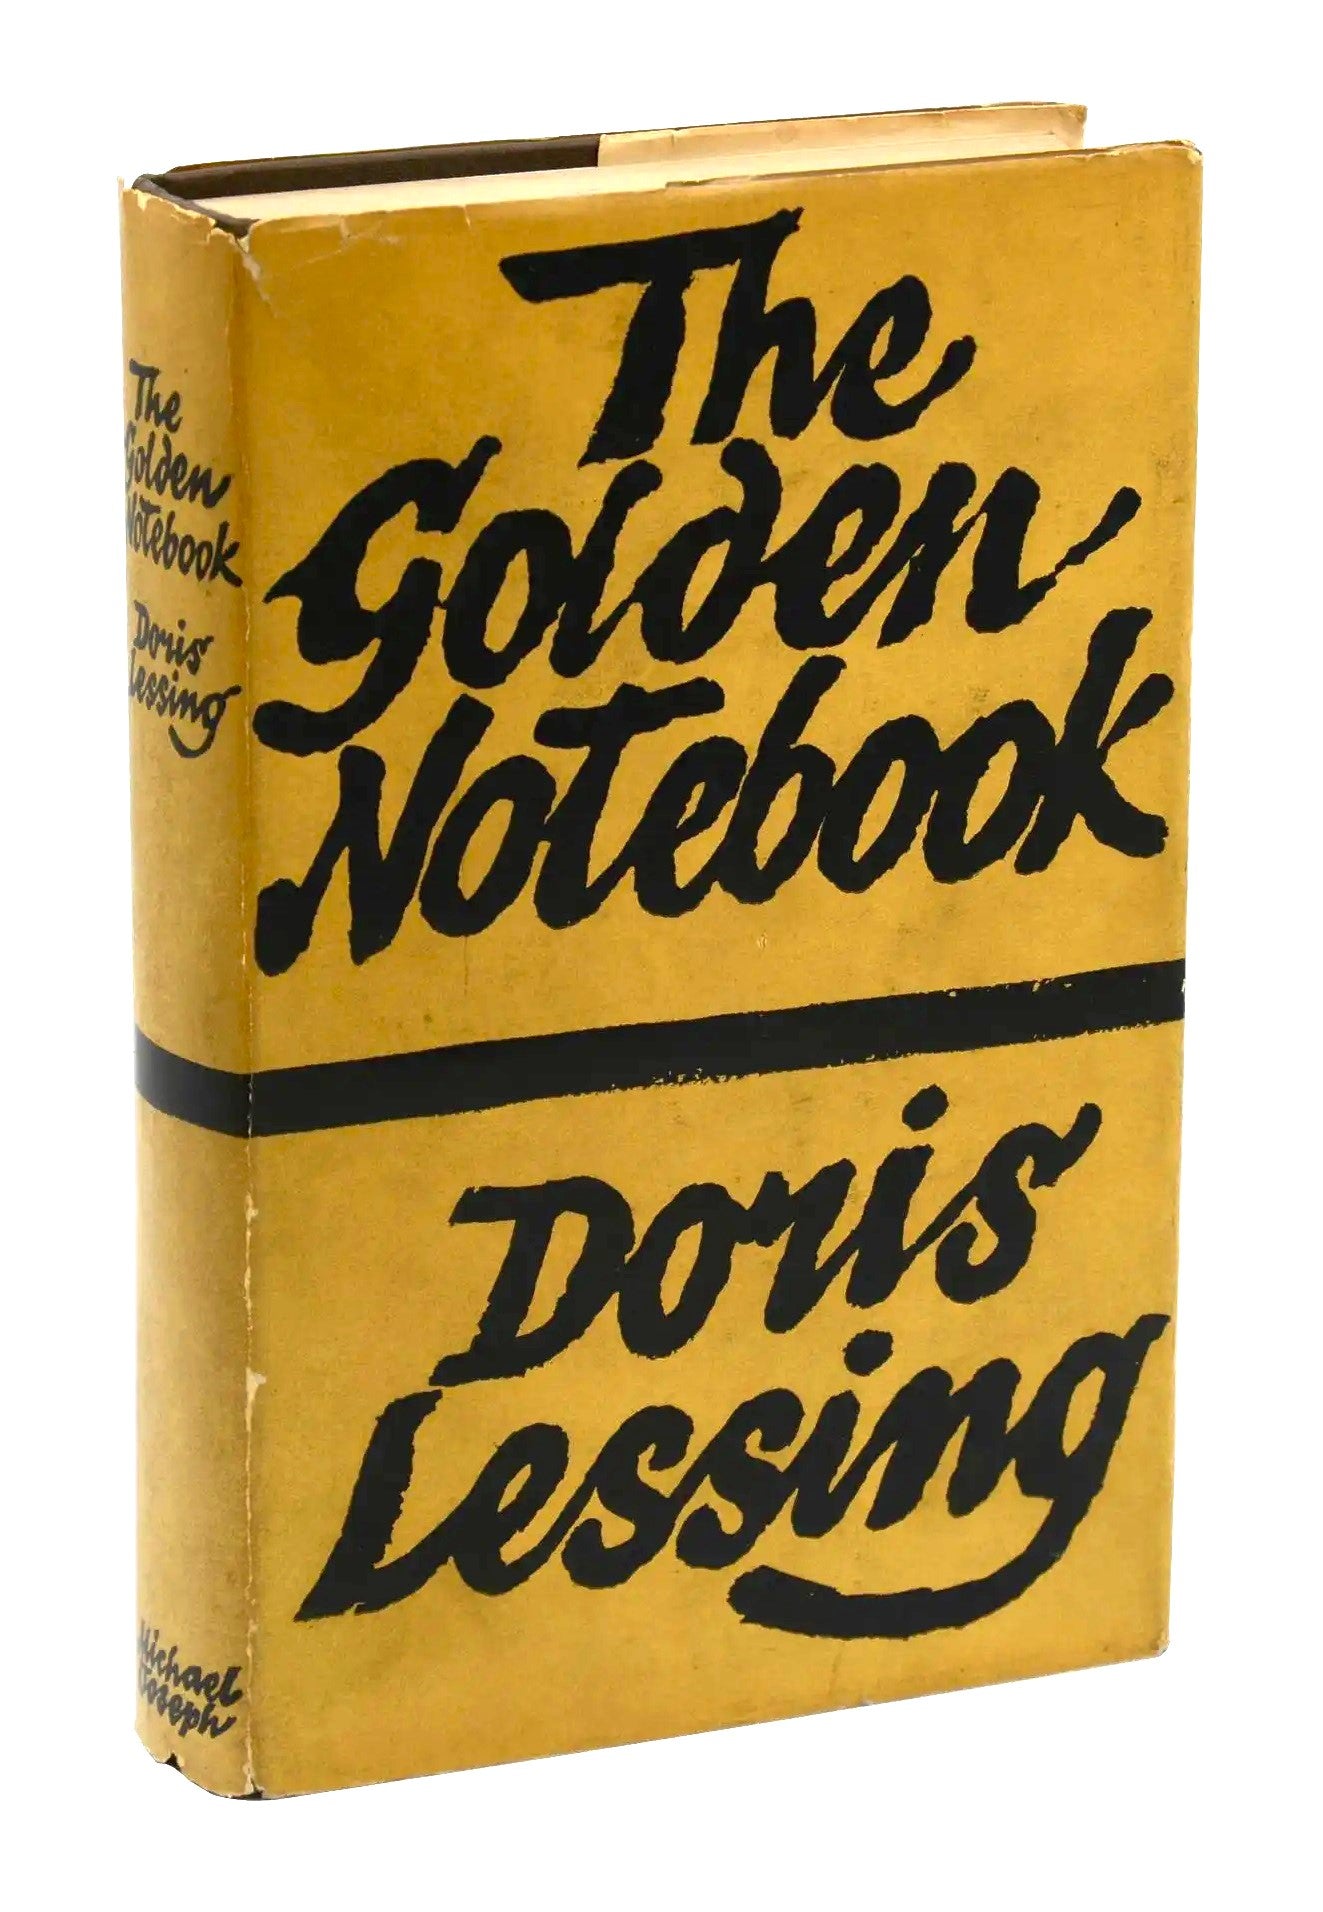 THE GOLDEN NOTEBOOK BY DORIS LESSING 1962 FIRST EDITION